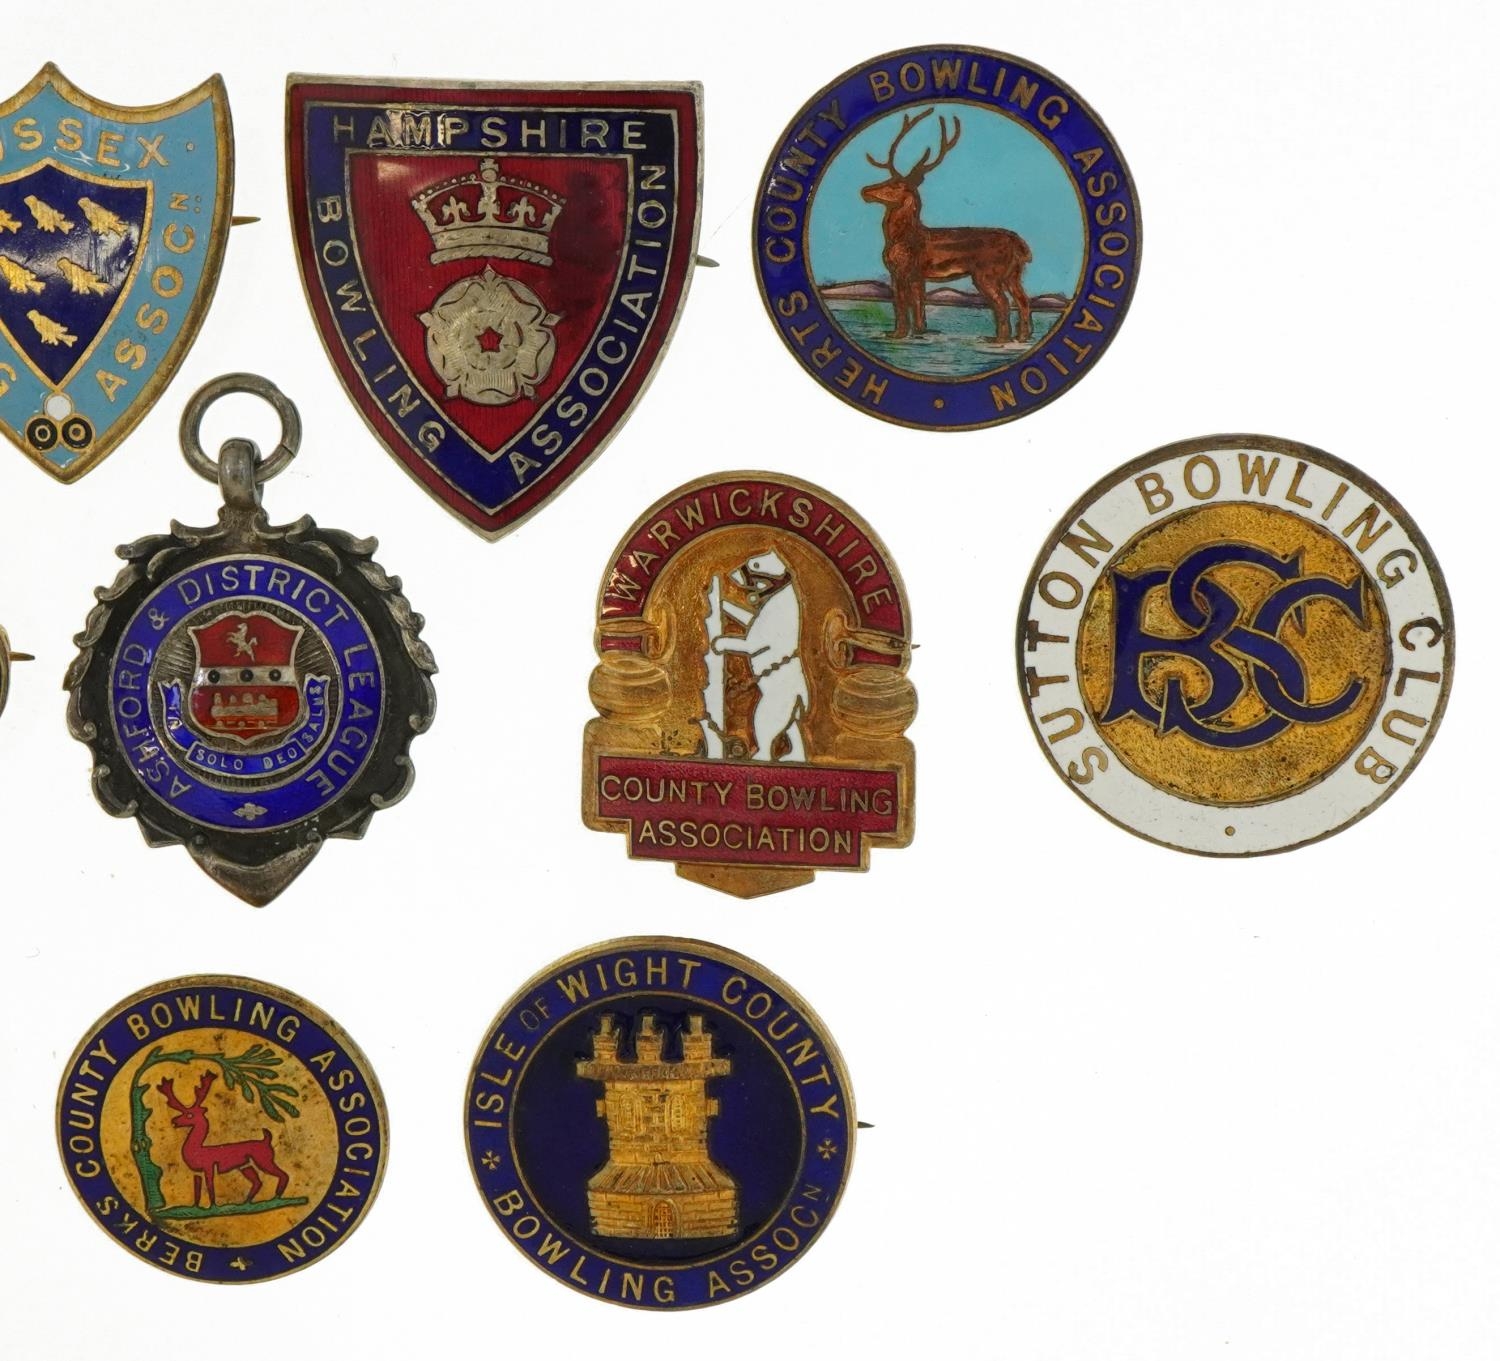 Bowling enamel pin badges and a silver and enamel jewel including Sussex Bowling Association and - Image 3 of 4